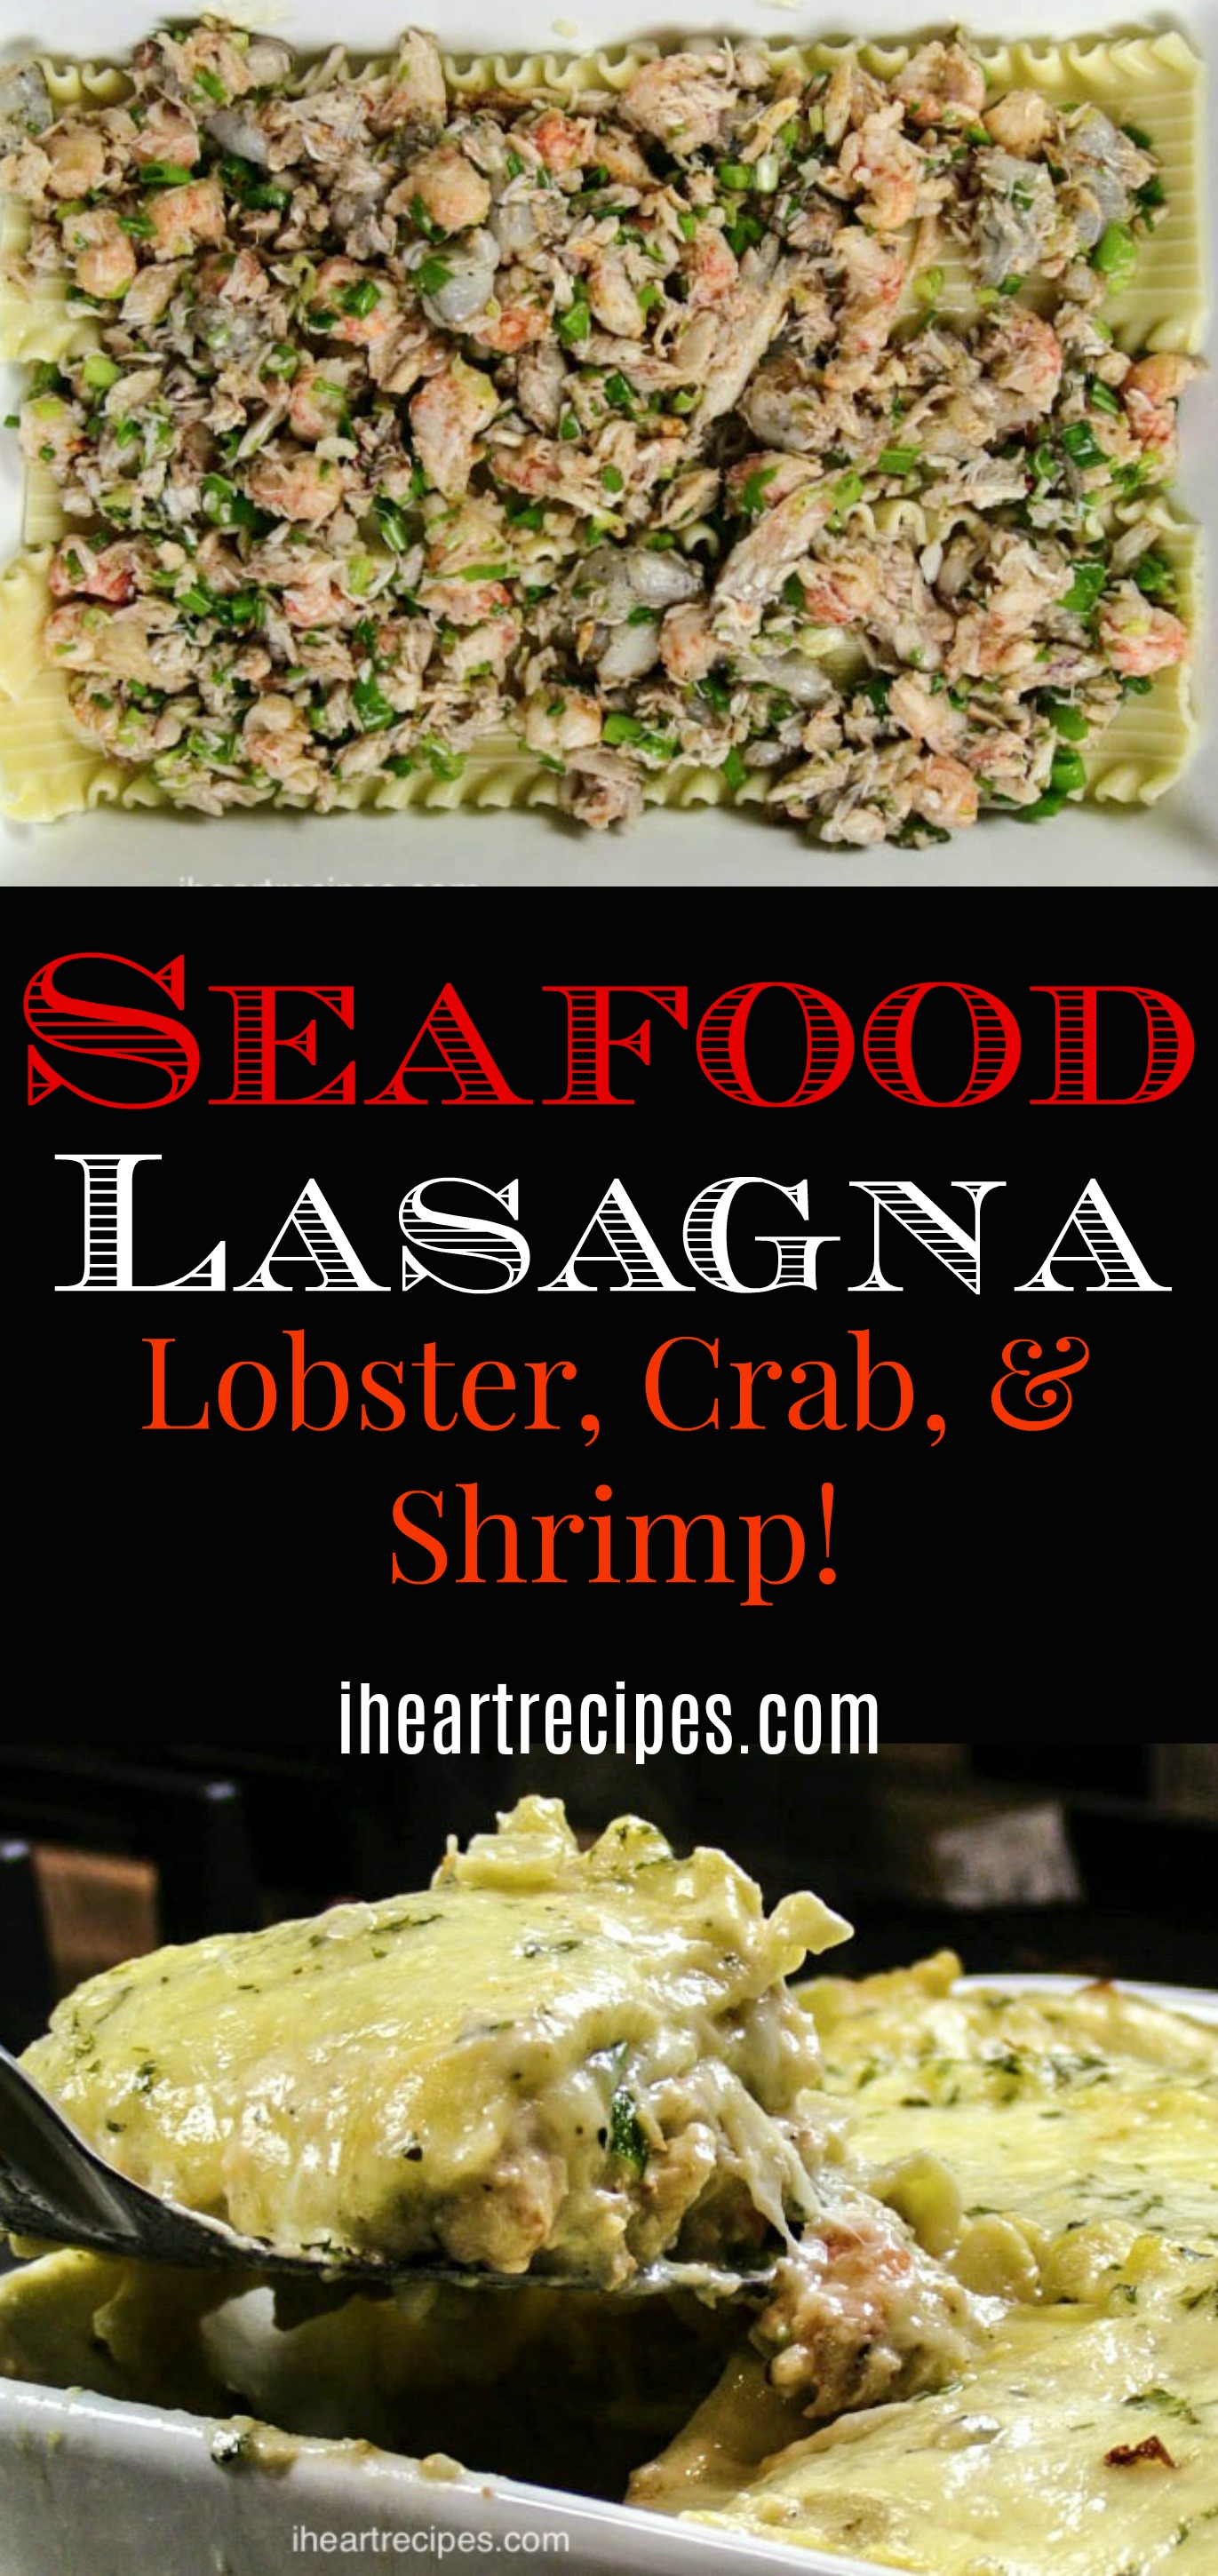 A Pinterest graphic shows two images of seafood lasagna. The top image shows a seafood mixture layered with lasagna noodles, and the bottom image shows a creamy slice of seafood lasagna cut from a casserole dish. Text in the center of the image says, “seafood lasagna with lobster, crab, & shrimp!”